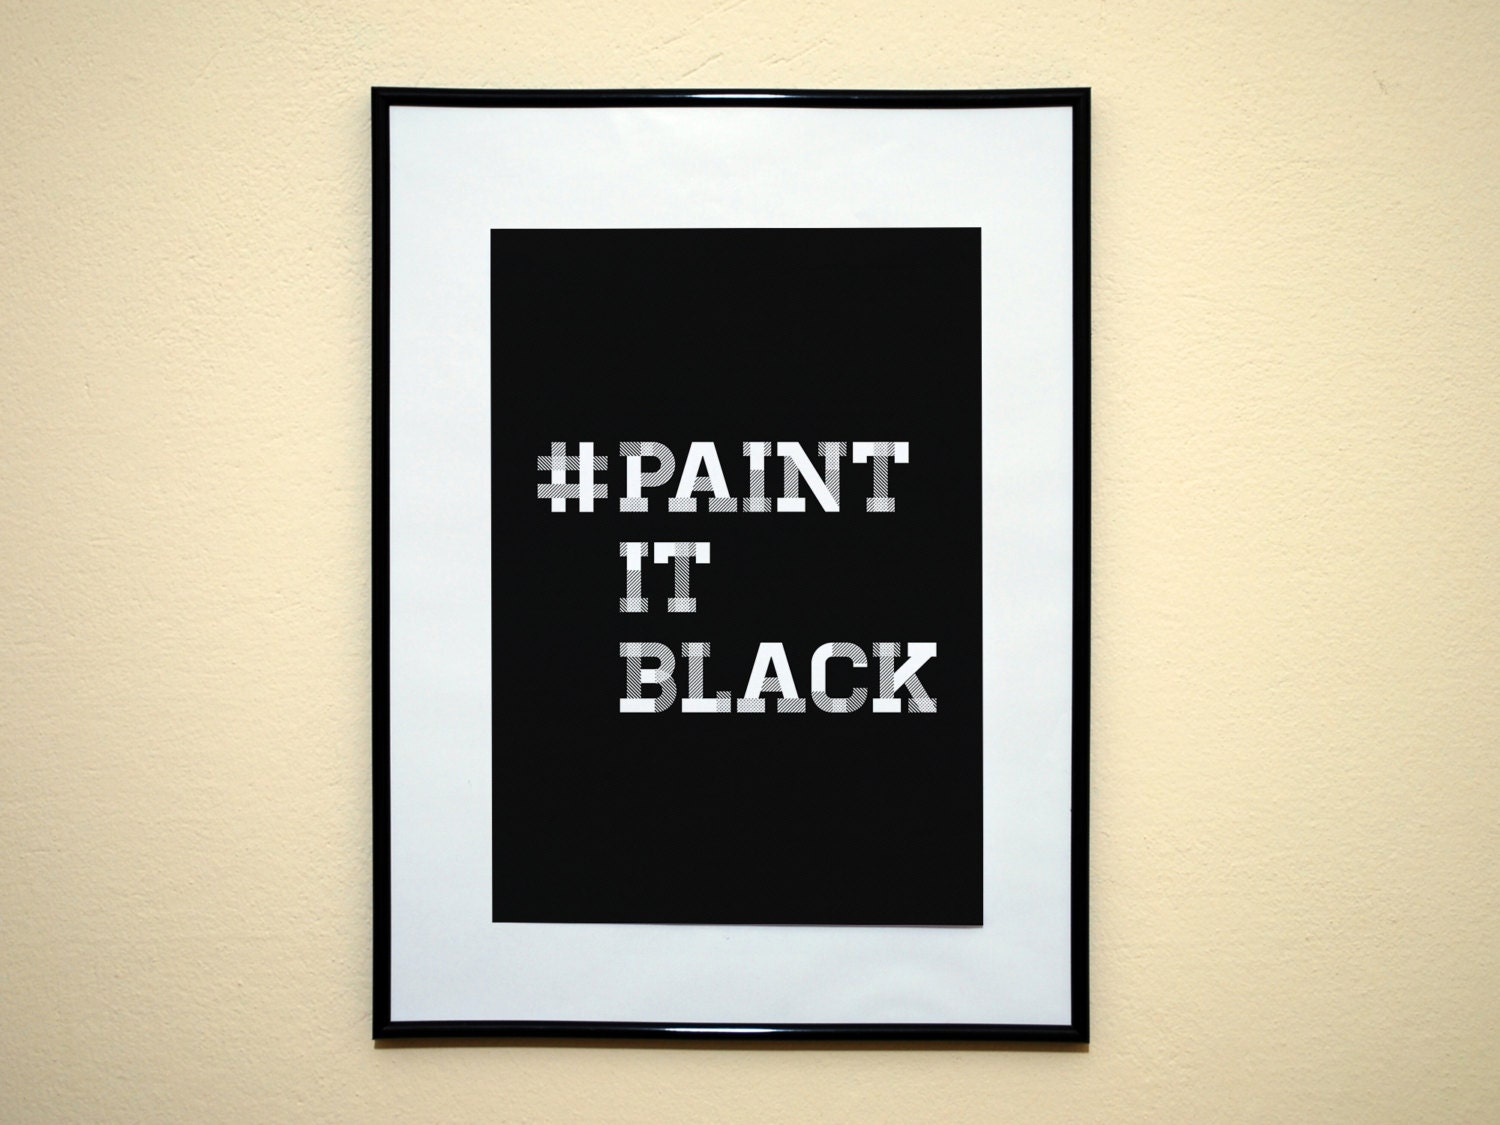 Hashtag Paint It Black Instagram Social Media style Art print  8x10 Inches Buy 2 Get 1 Free